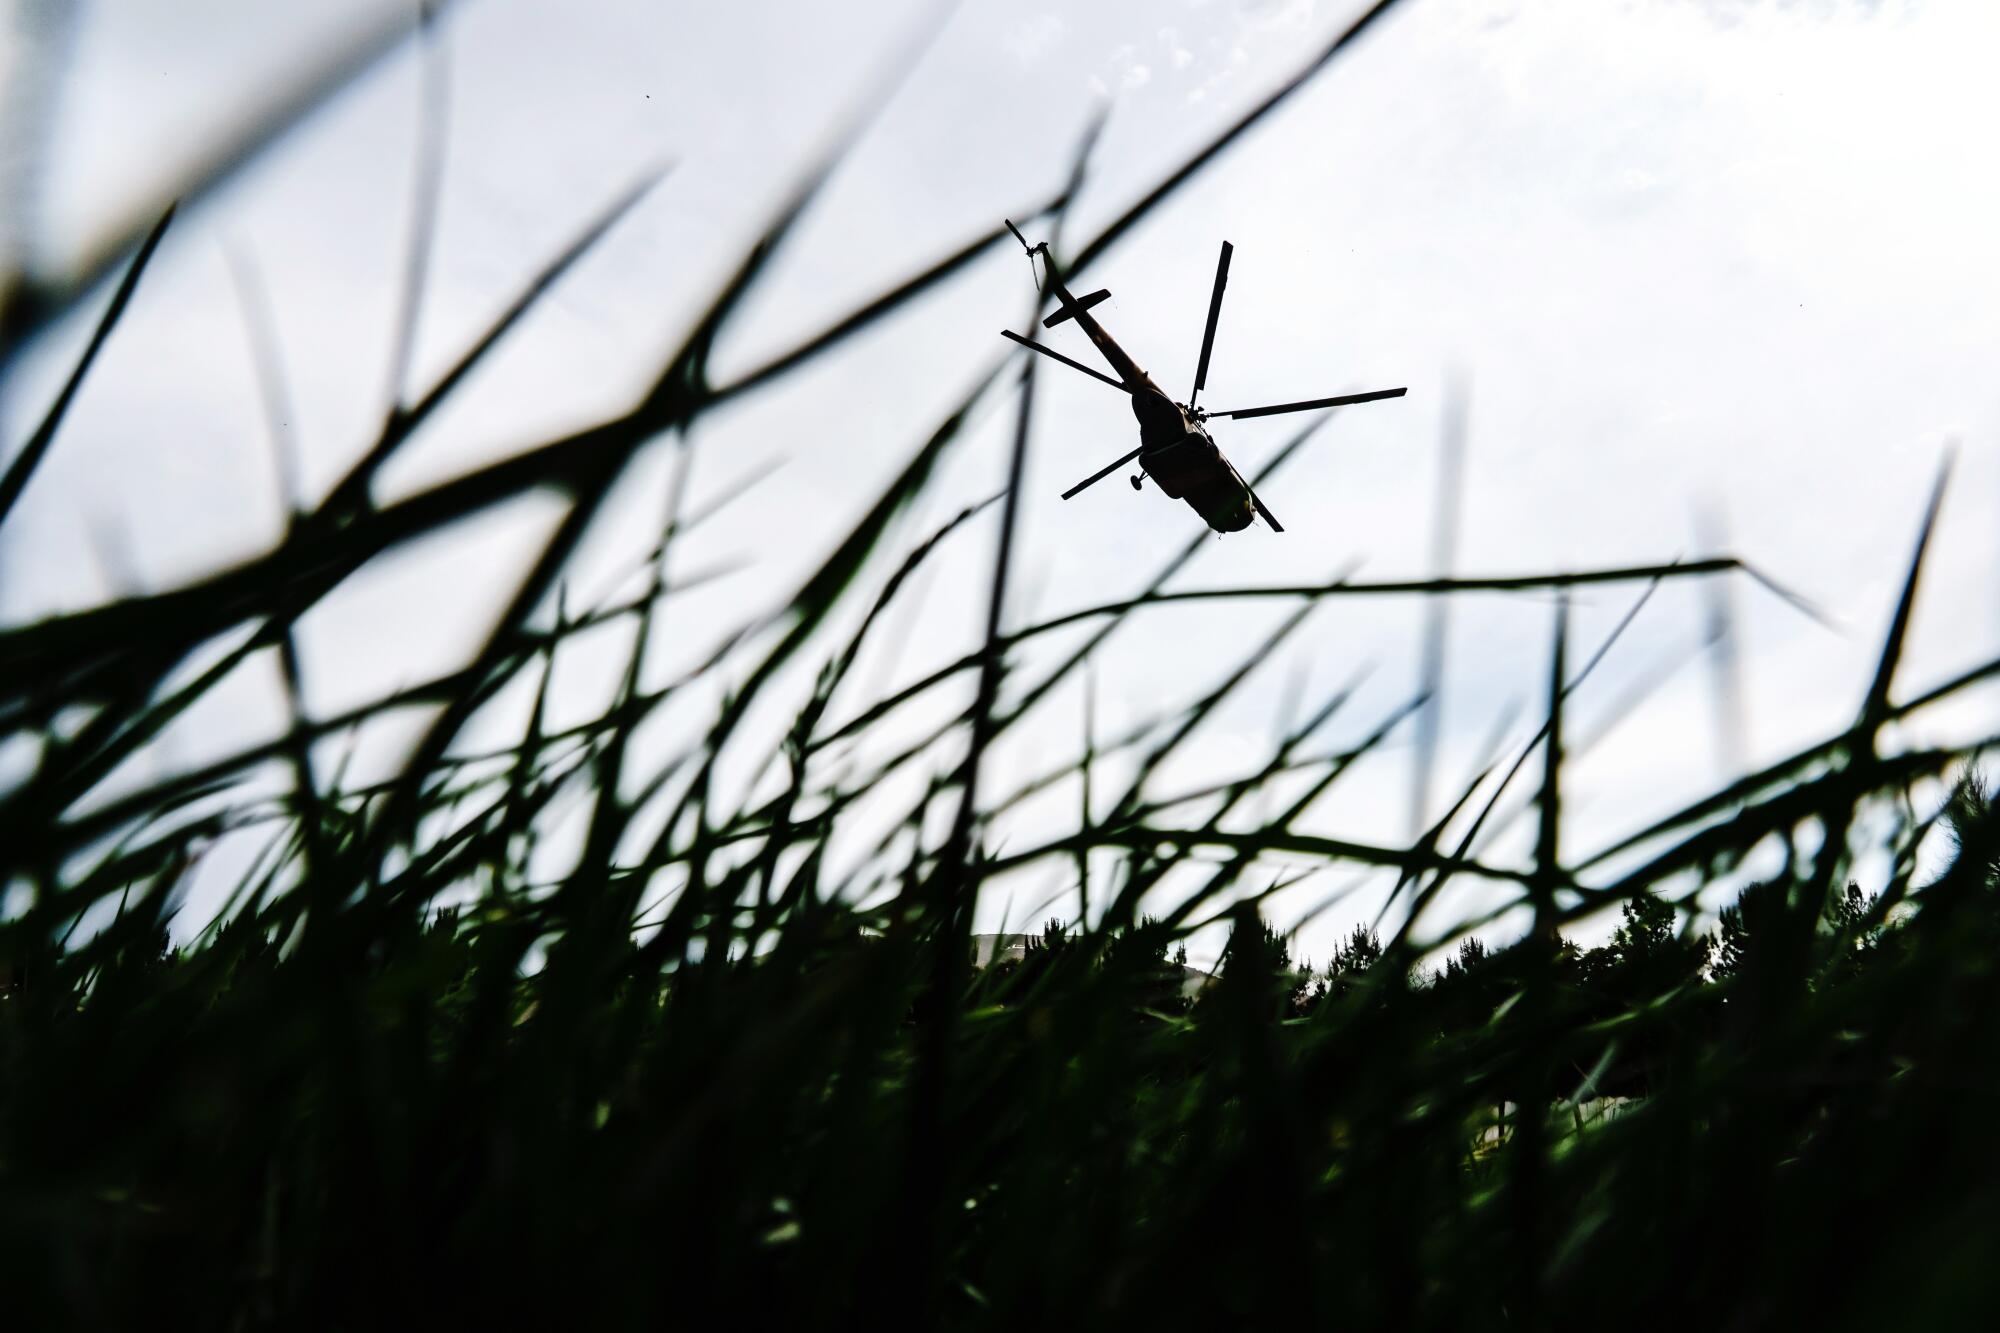 A helicopter is seen through blades of grass.